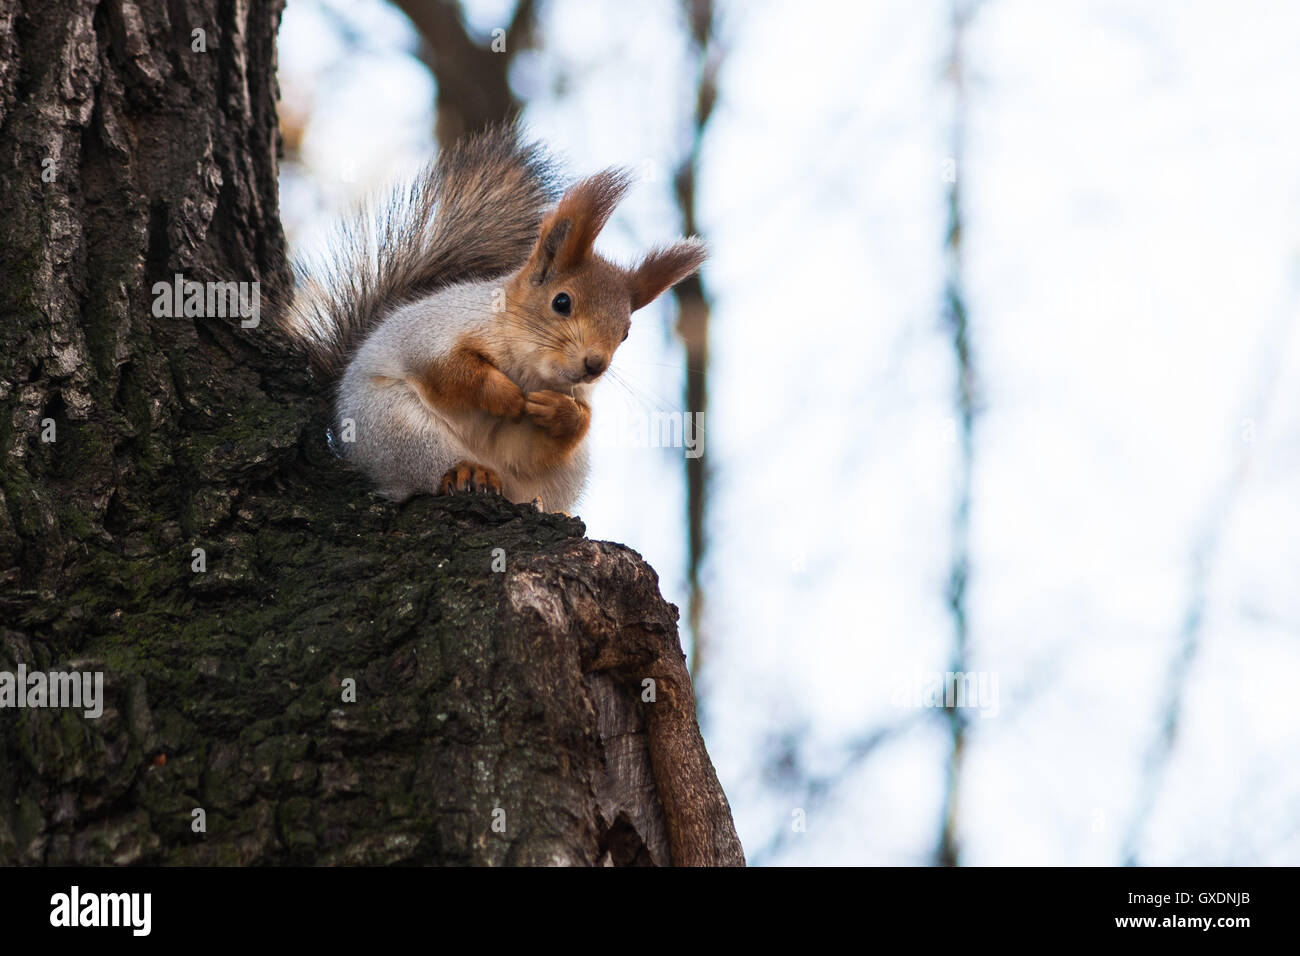 Small funny squirrel animal sits on a tree branch and looks downward. Stock Photo